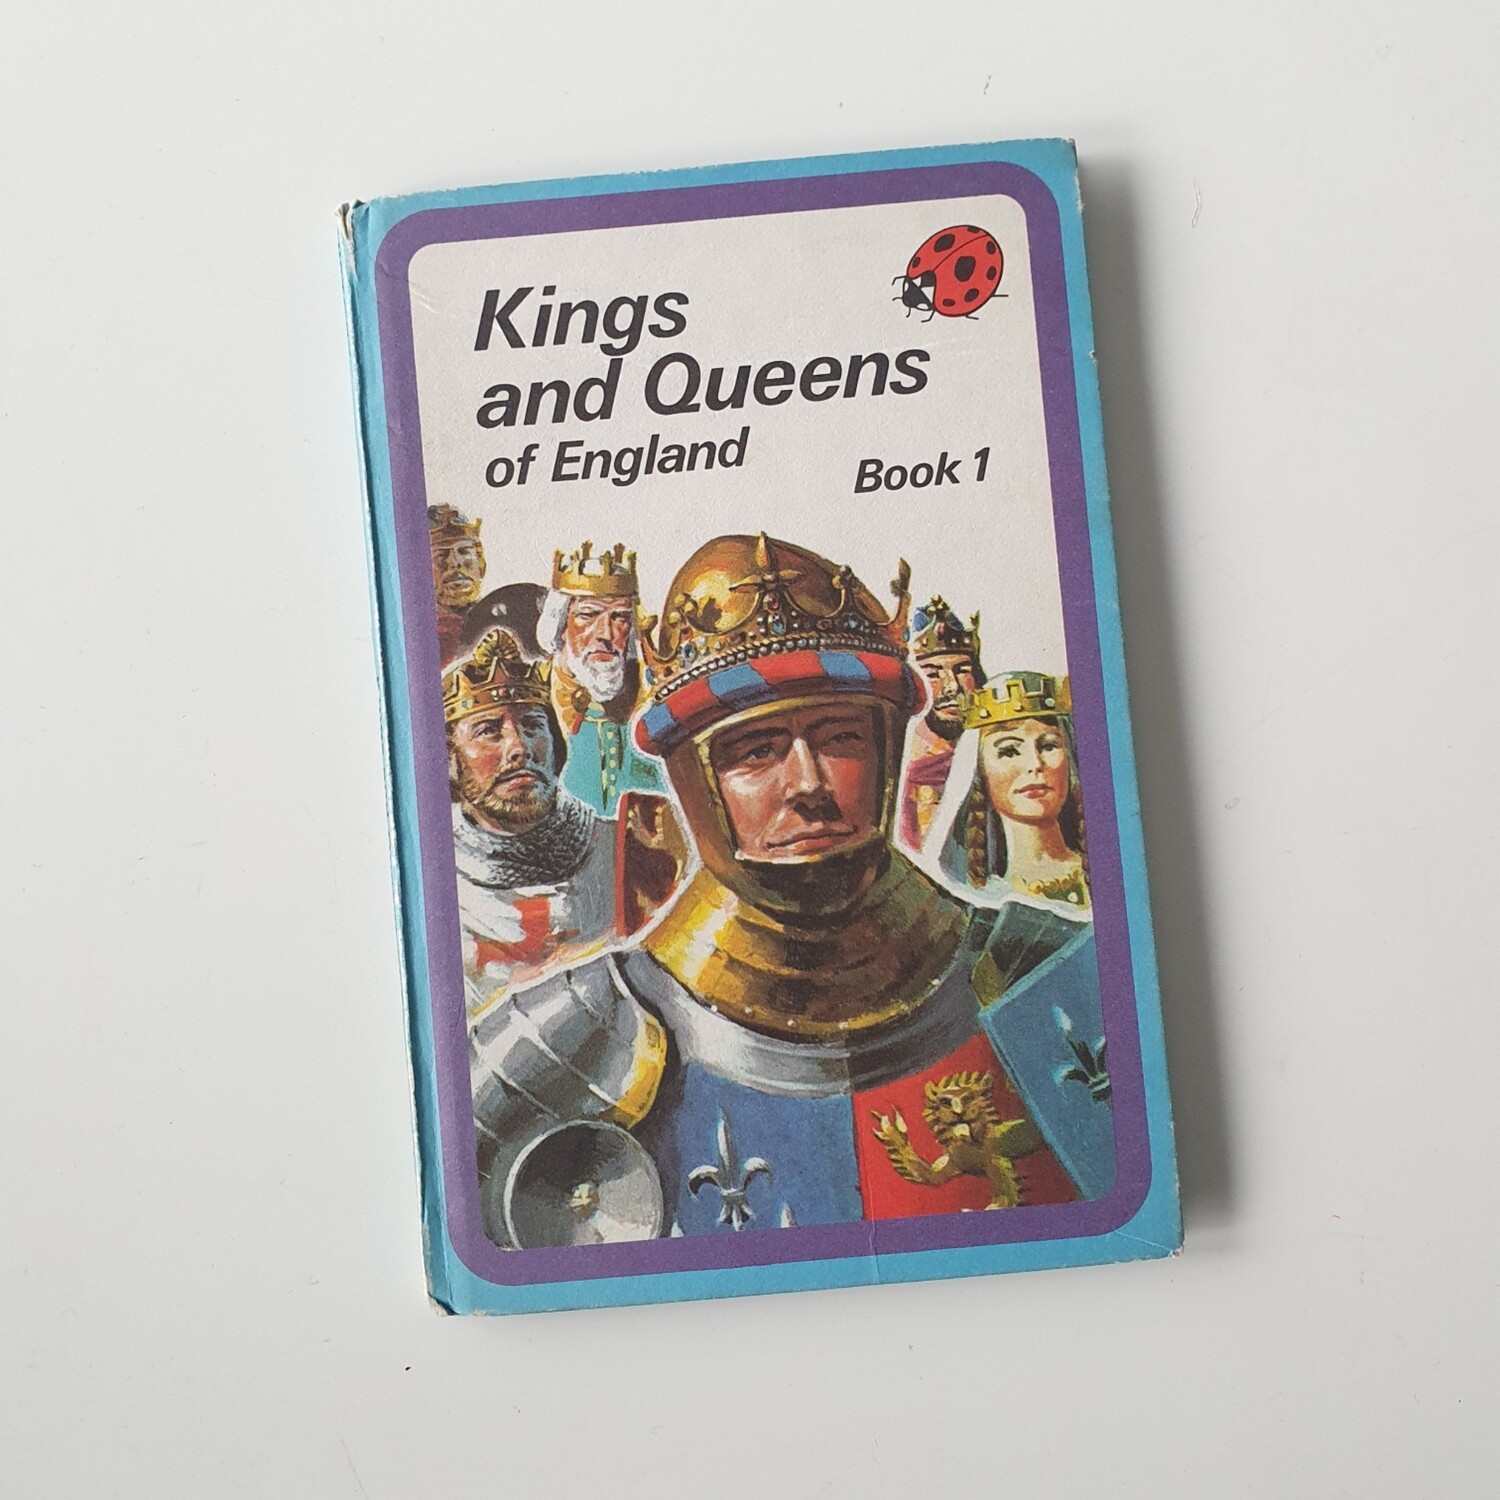 Kings and Queens of England Notebook - Ladybird book